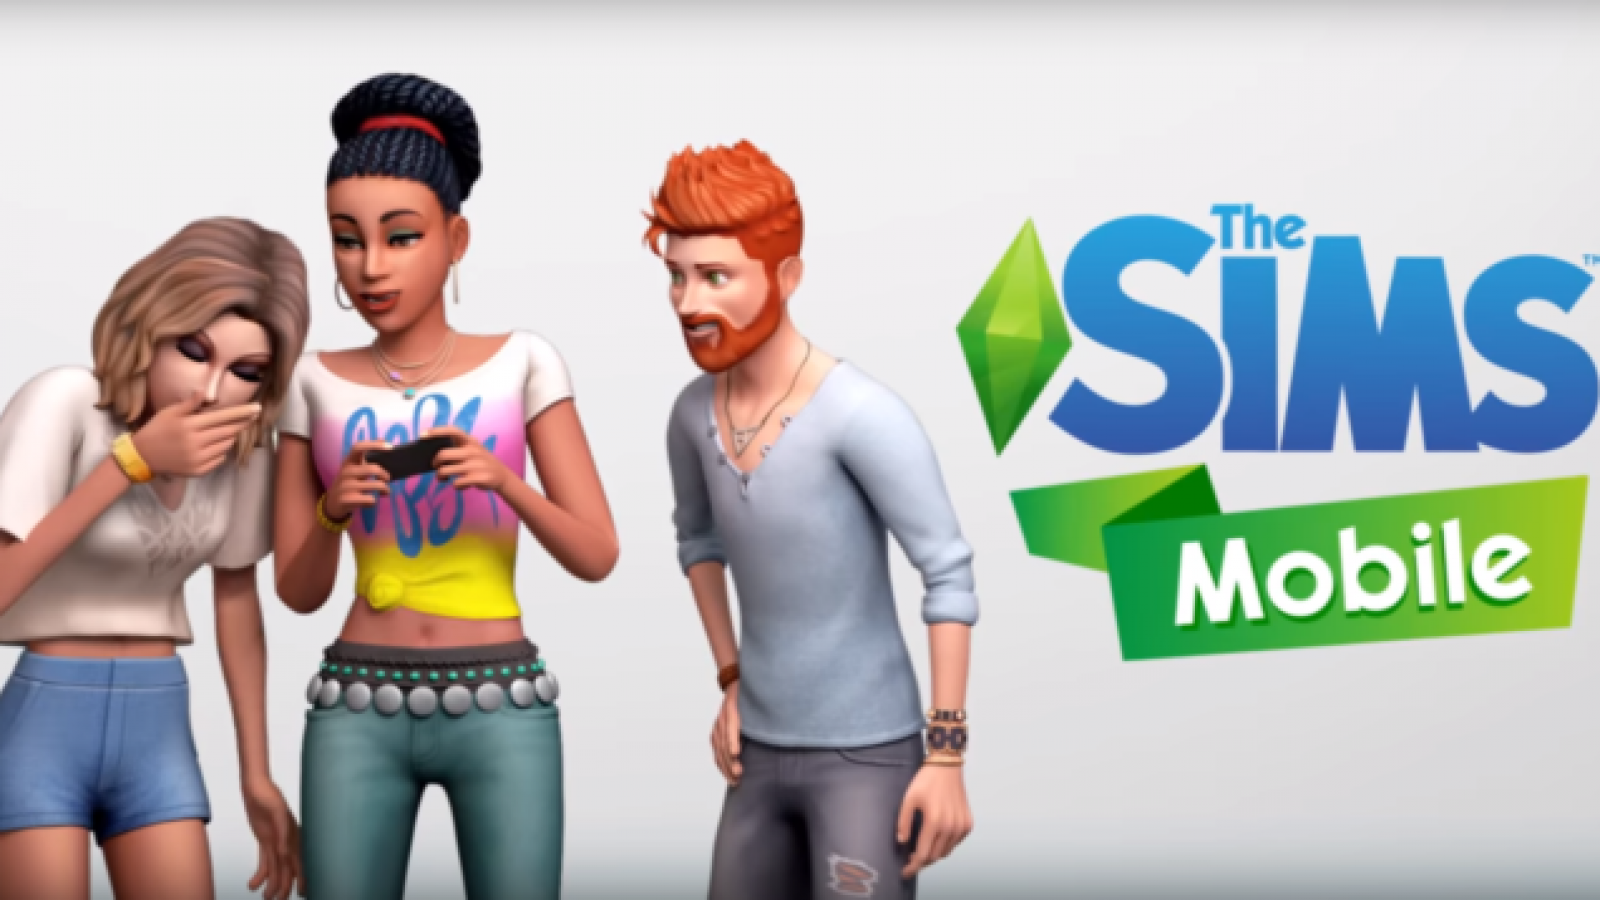 Mobile sims games you can cheat on online